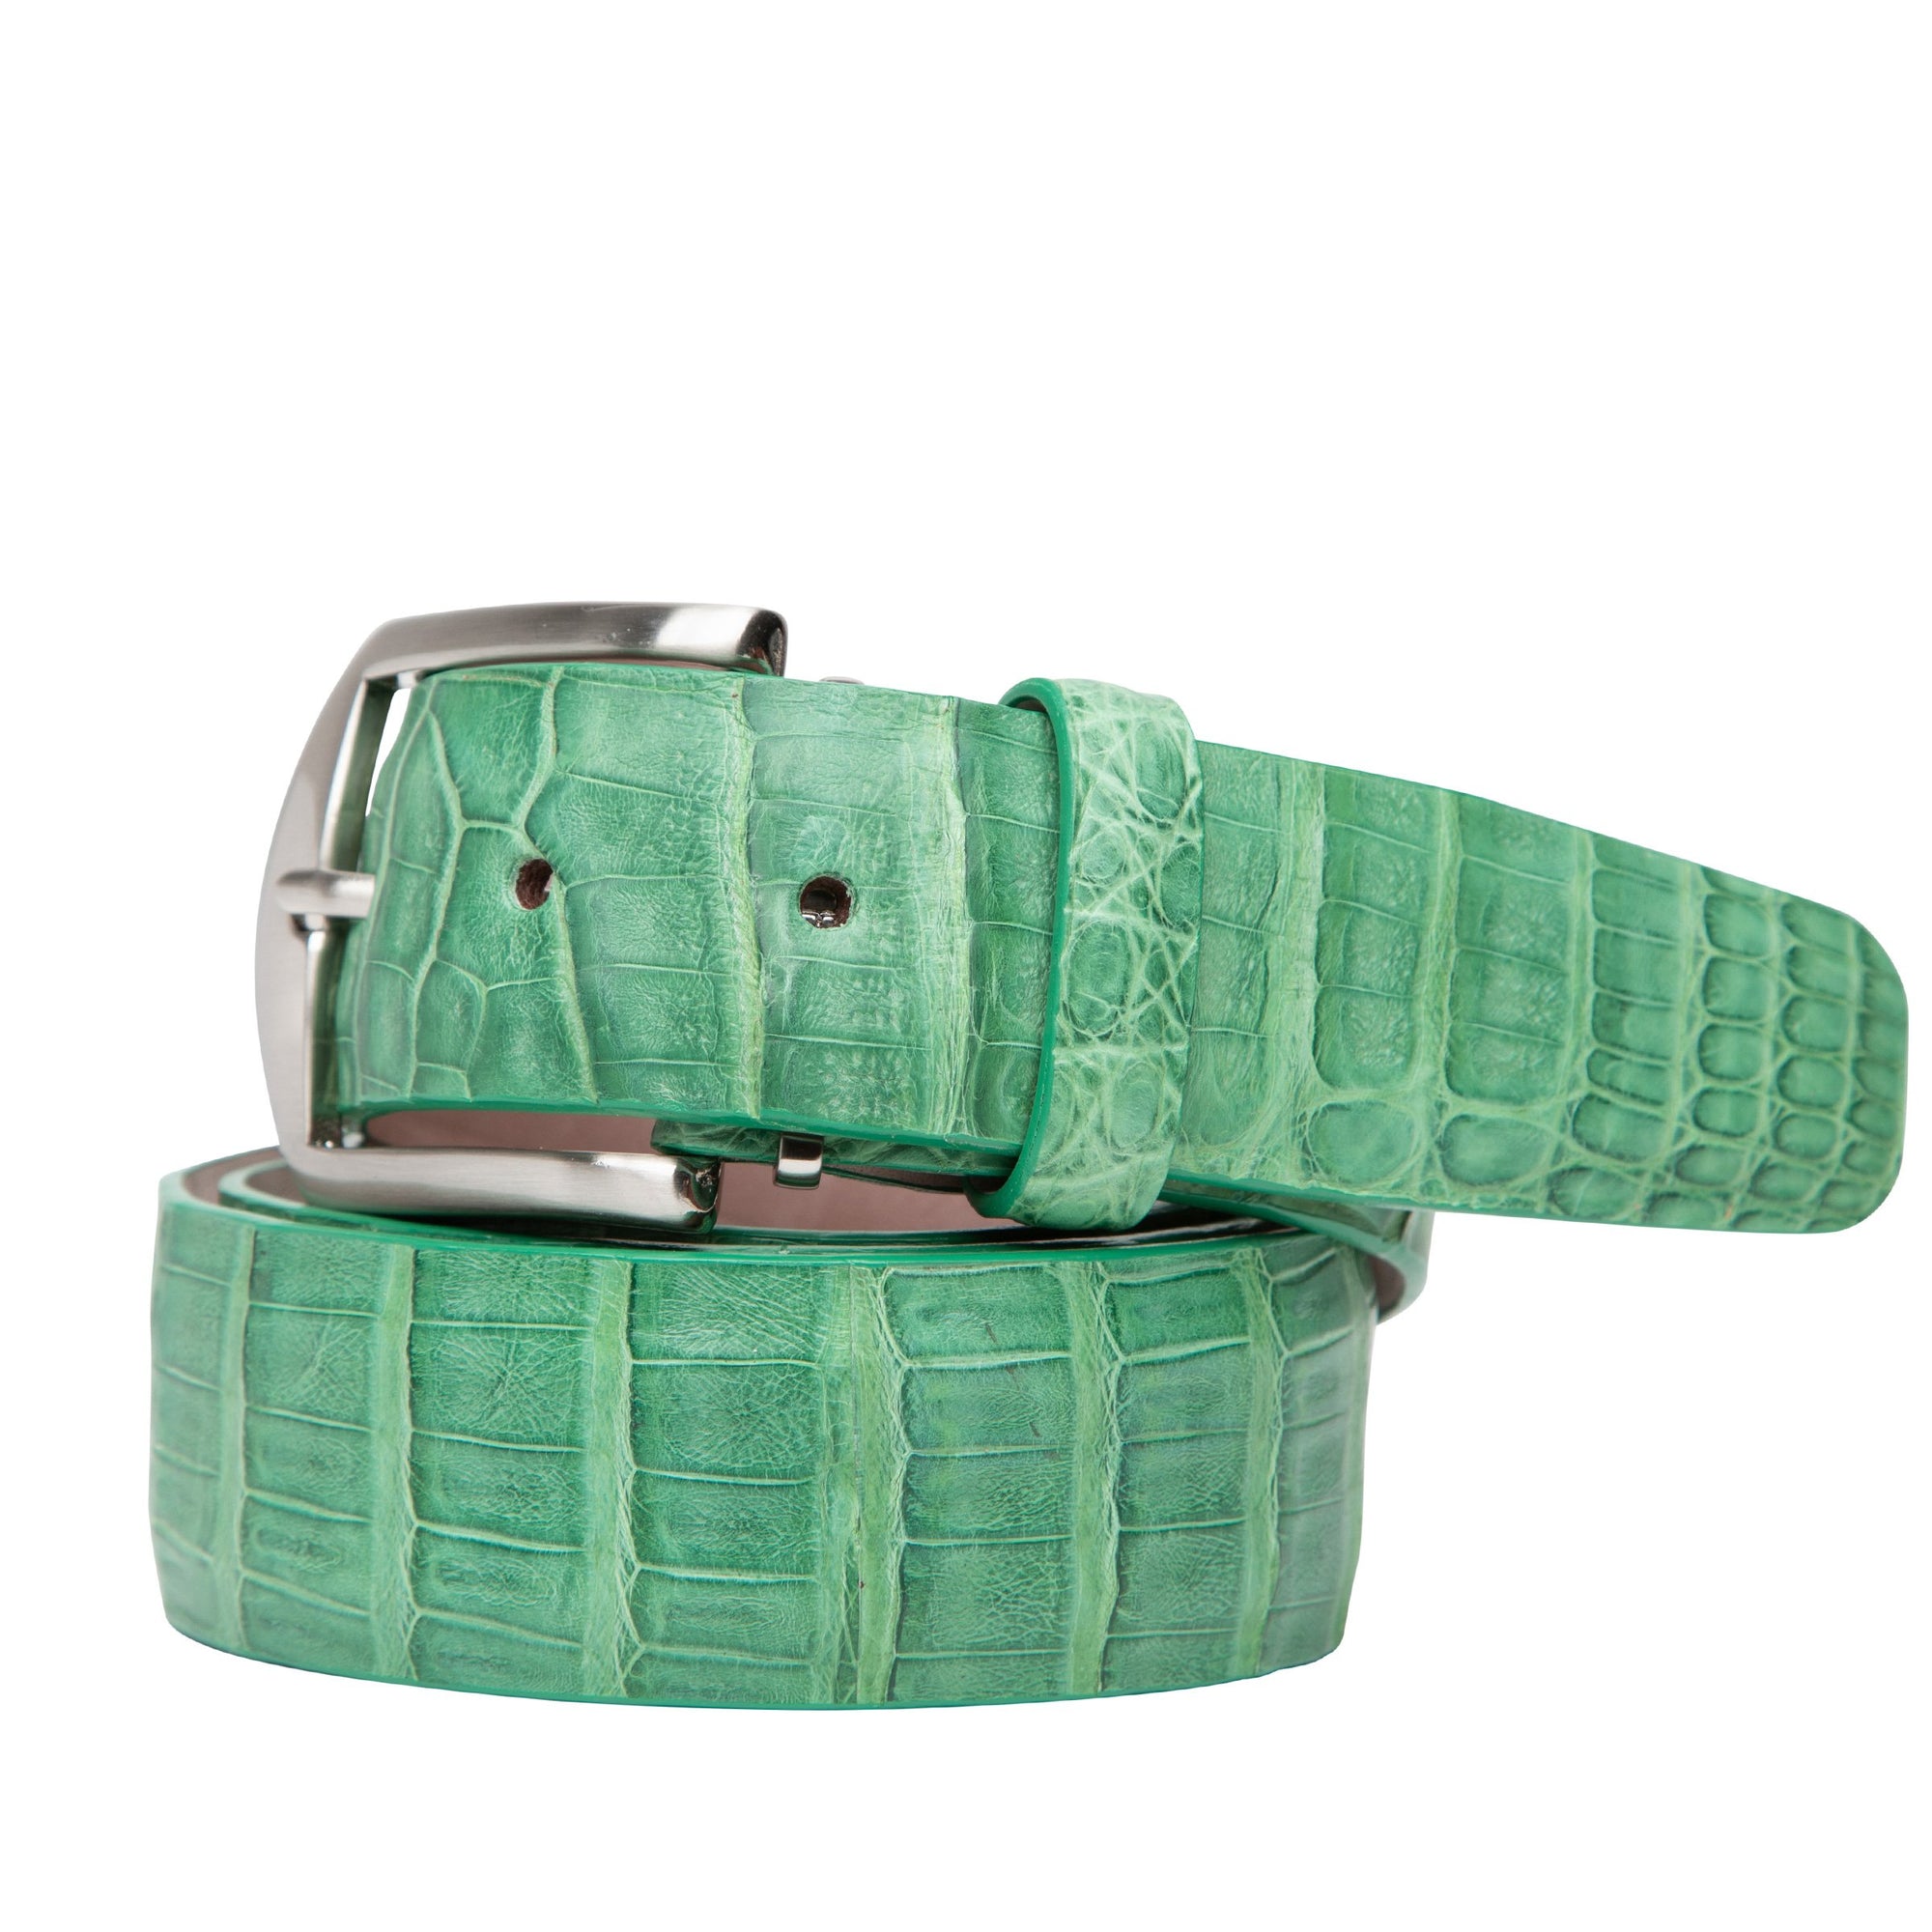 Which are the main differences among genuine crocodile, alligator and  caiman leathers?